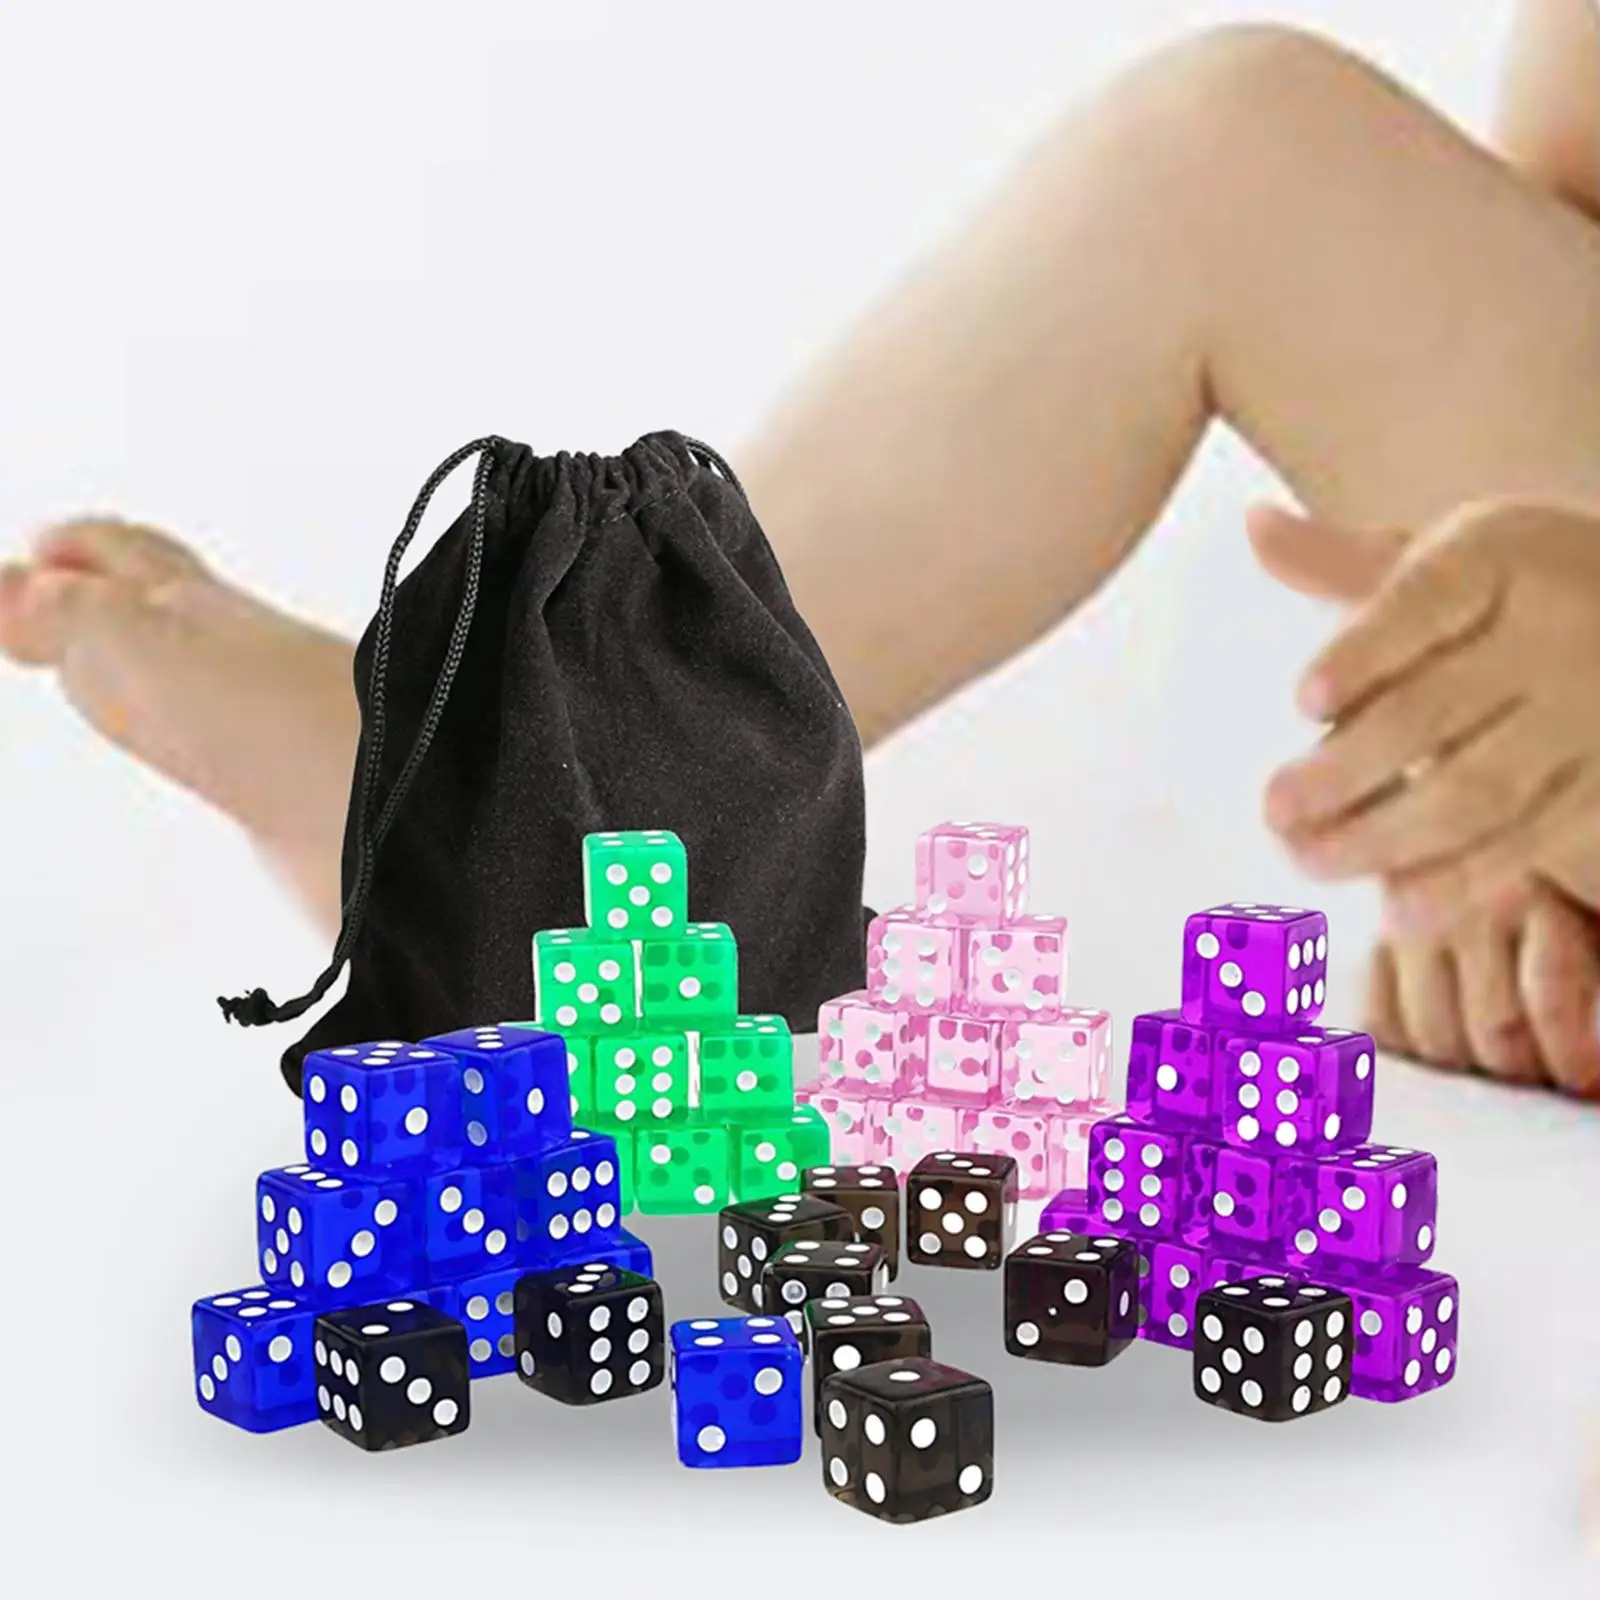 50x 6 Sided Dices Set Entertainment Toy Game Dices for Role Playing Game